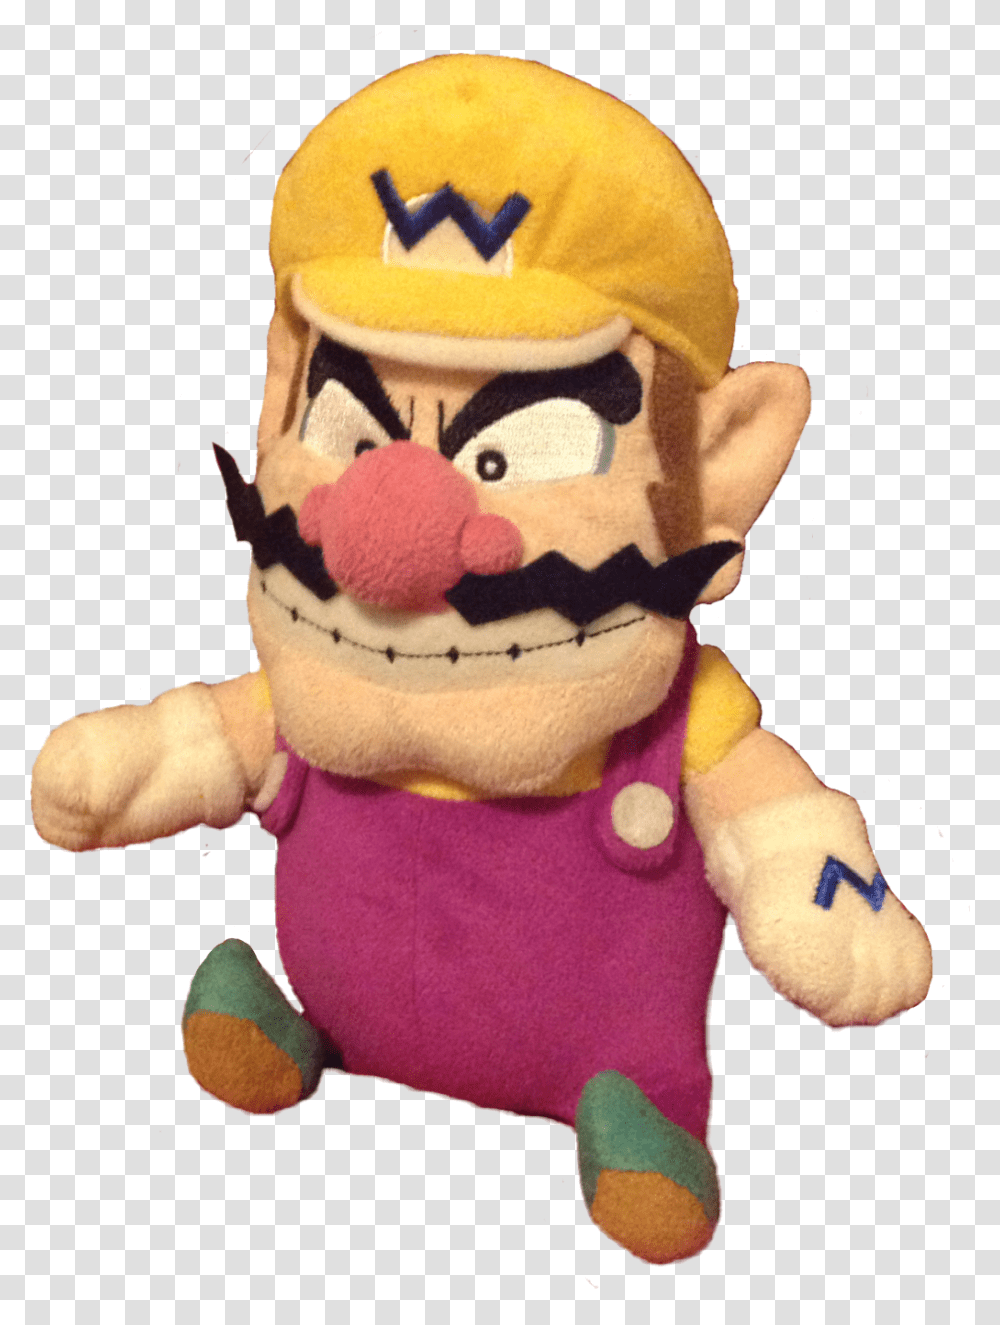 Wario Hat Wario Plush, Toy, Figurine, Mascot, Sweets Transparent Png